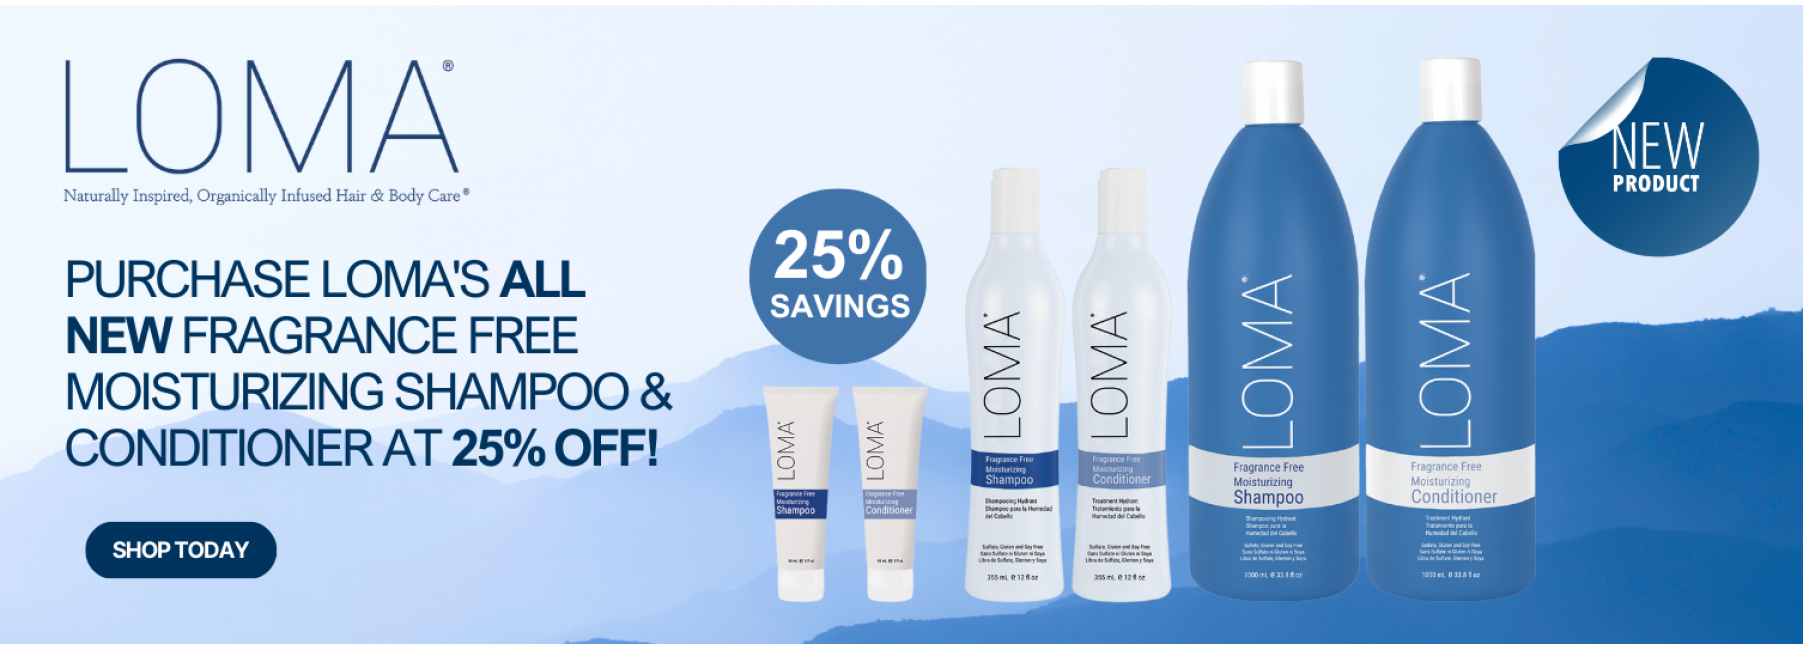 LOMA FRAGRANCE FREE MOIST COND PROMO BANNER MAY_JUNE 2023